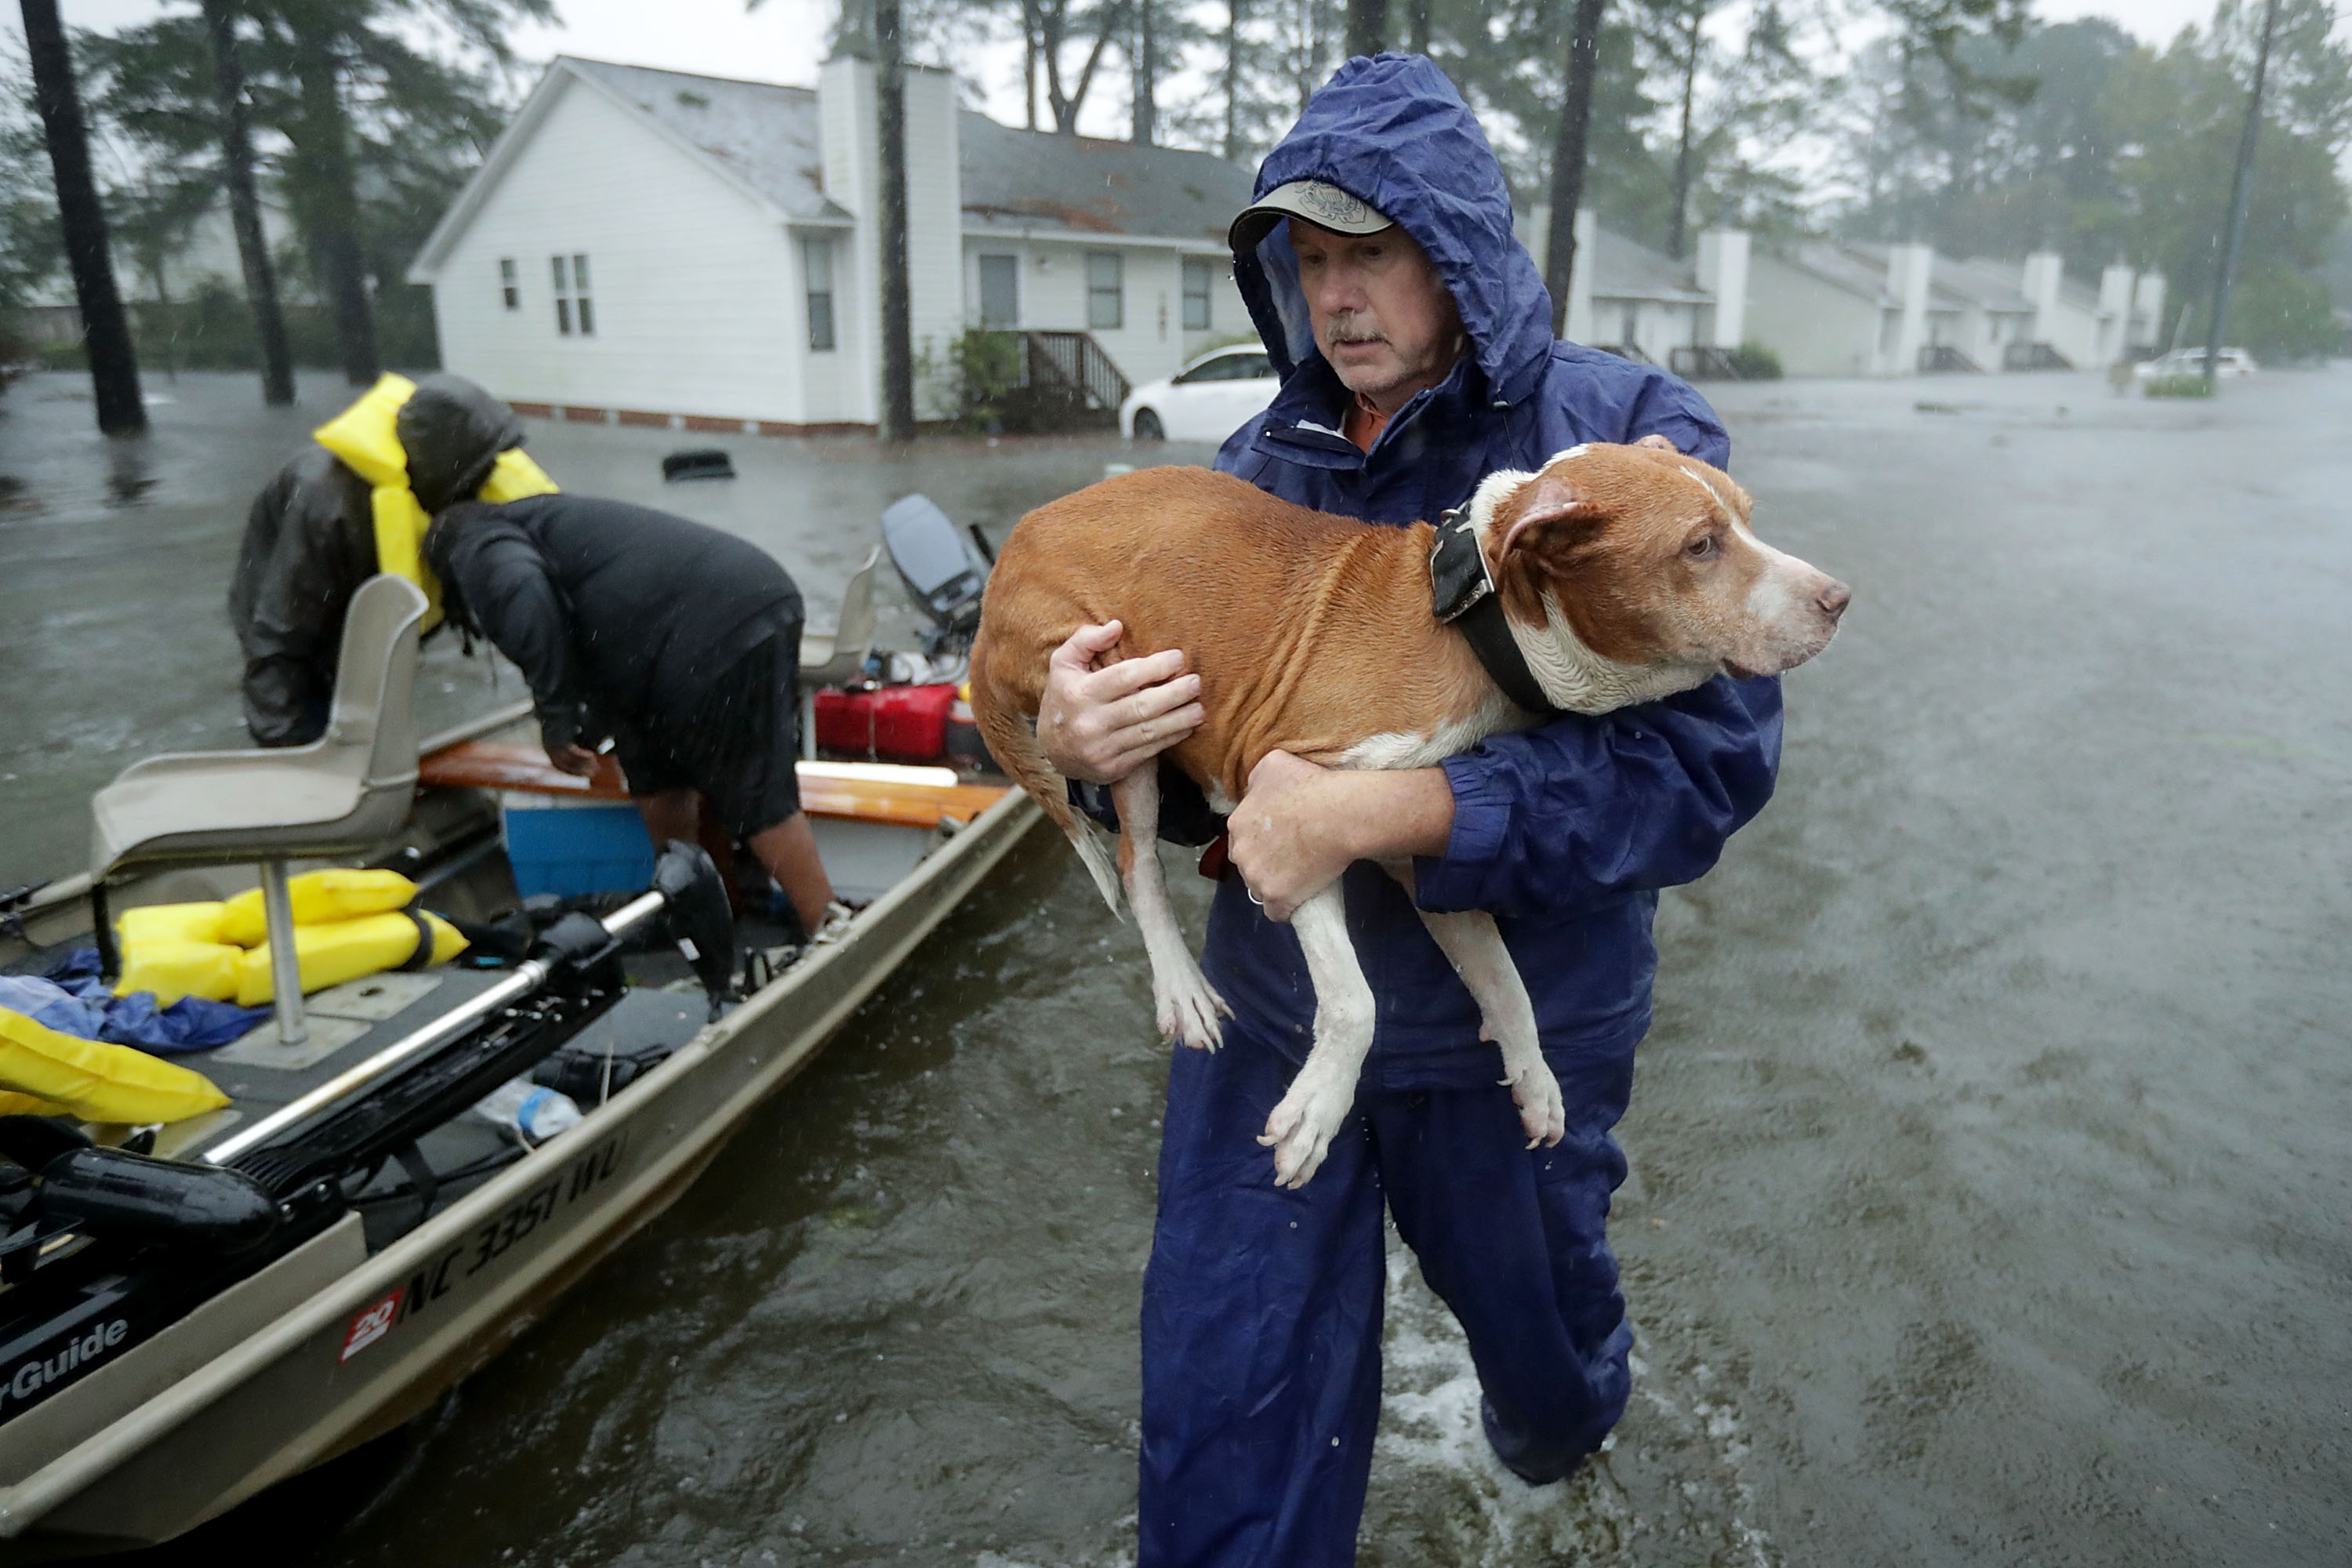 Volunteers from all over North Carolina help rescue residents and their pets from their flooded homes during Hurricane Florence September 14, 2018 in New Bern, North Carolina. (Chip Somodevilla&mdash;Getty Images)